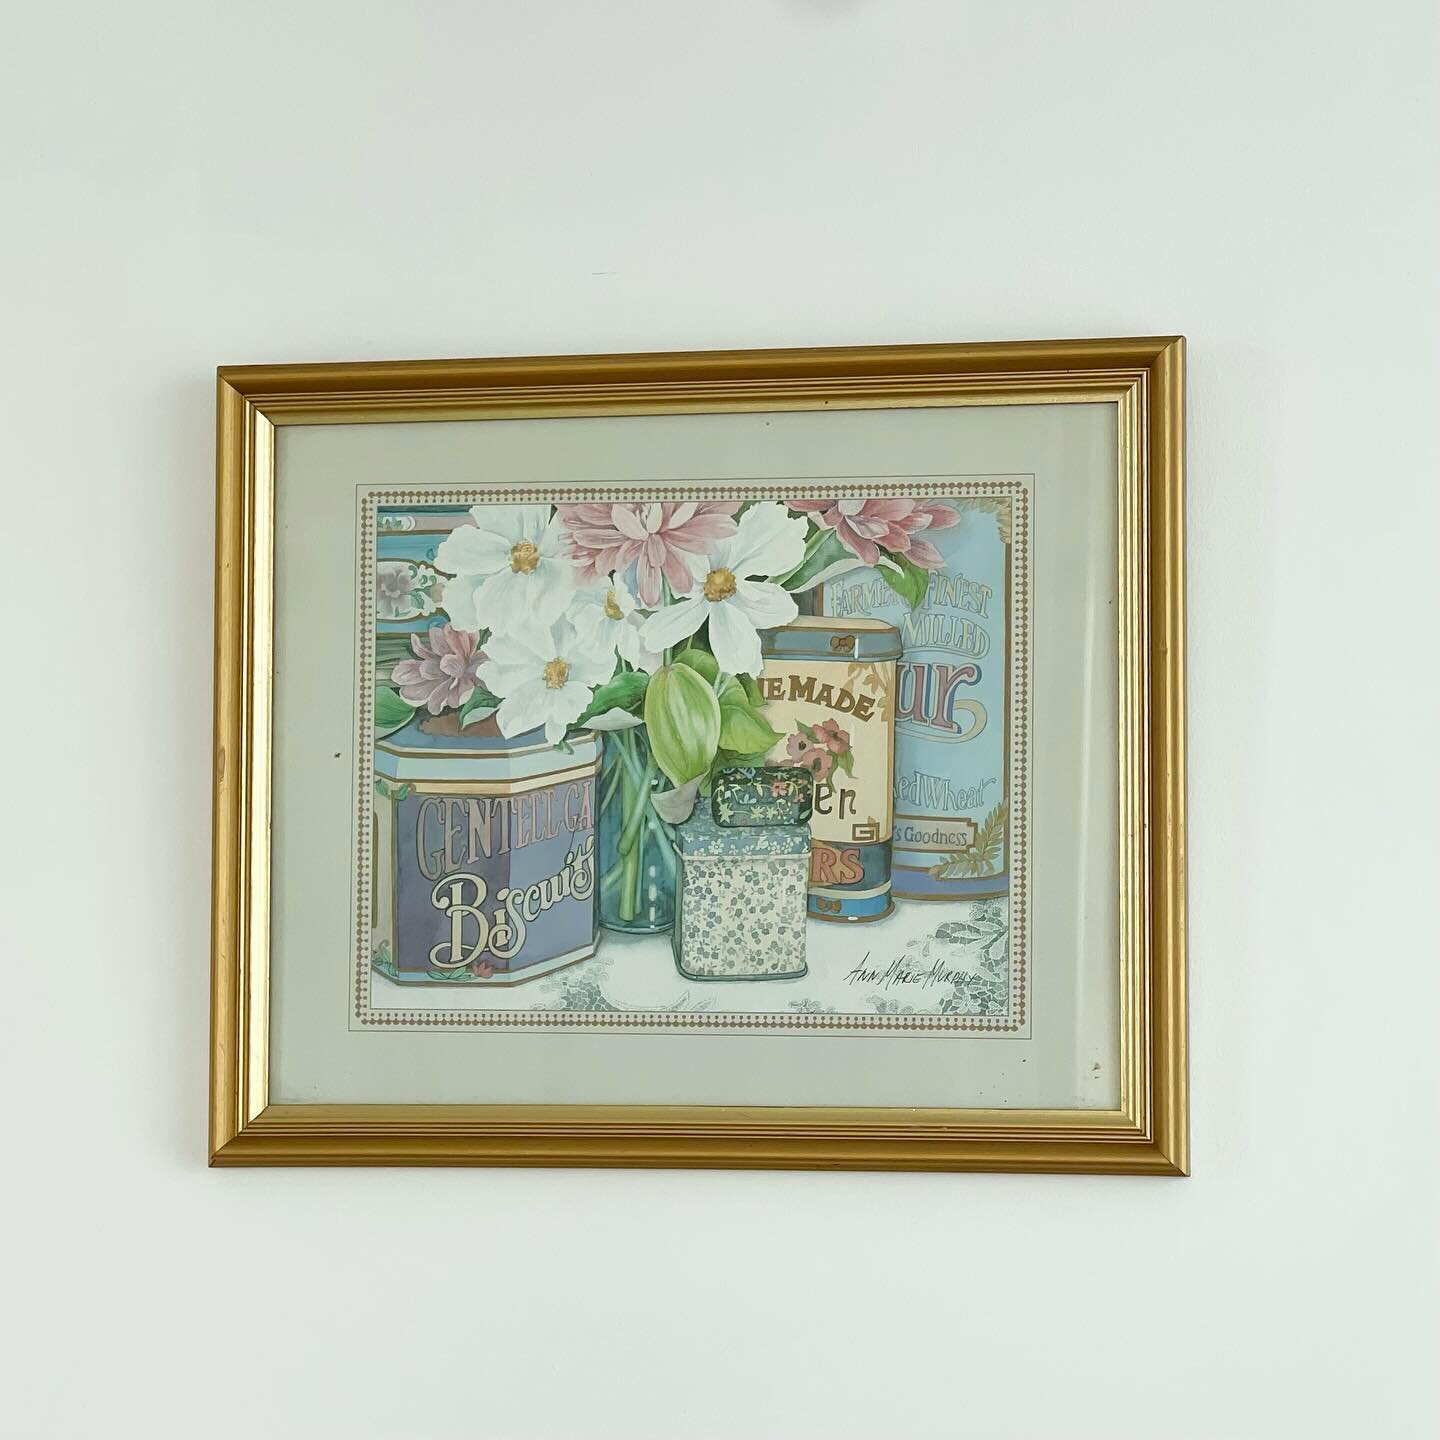 SOLD 🍋 vintage framed watercolour kitchen print 🍪

&bull; ready to hang in your kitchen!
&bull; by ann marie murphy
&bull; print is framed in a gold frame with glass protecting the artwork
&bull; some tiny brown specks on the glass in one corner an